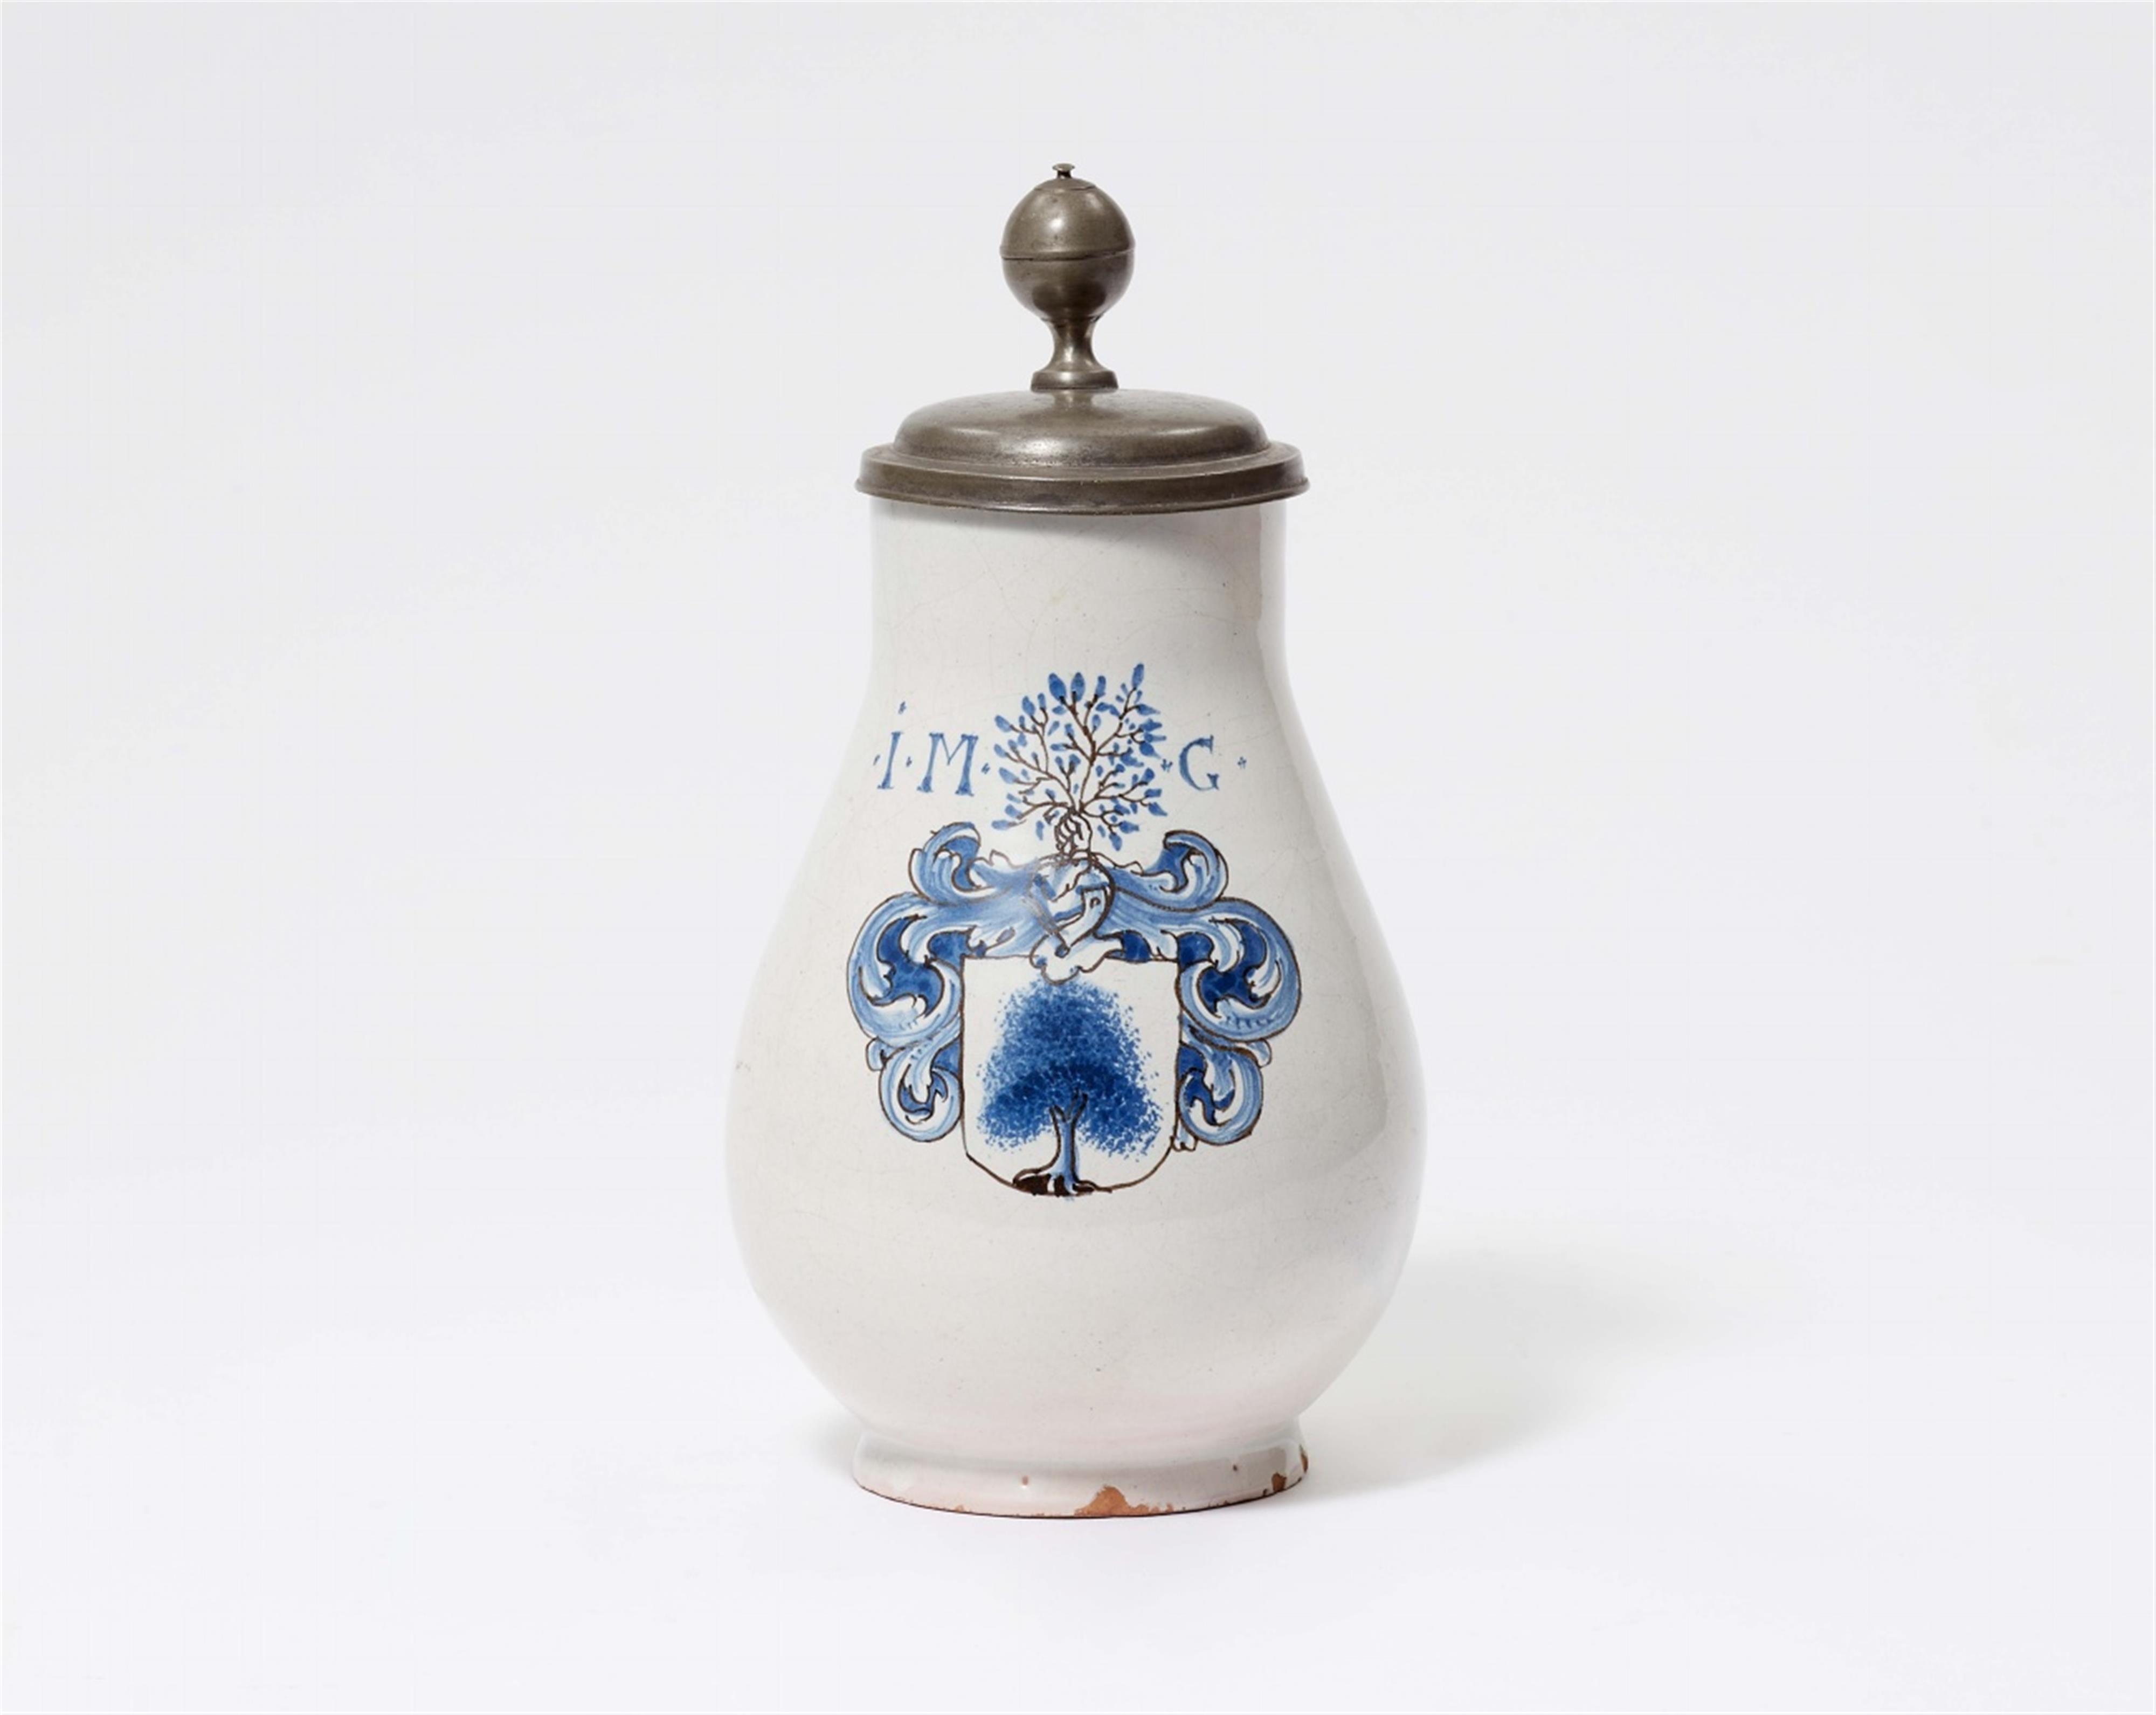 A Hanau faience pitcher with a coat of arms - image-1